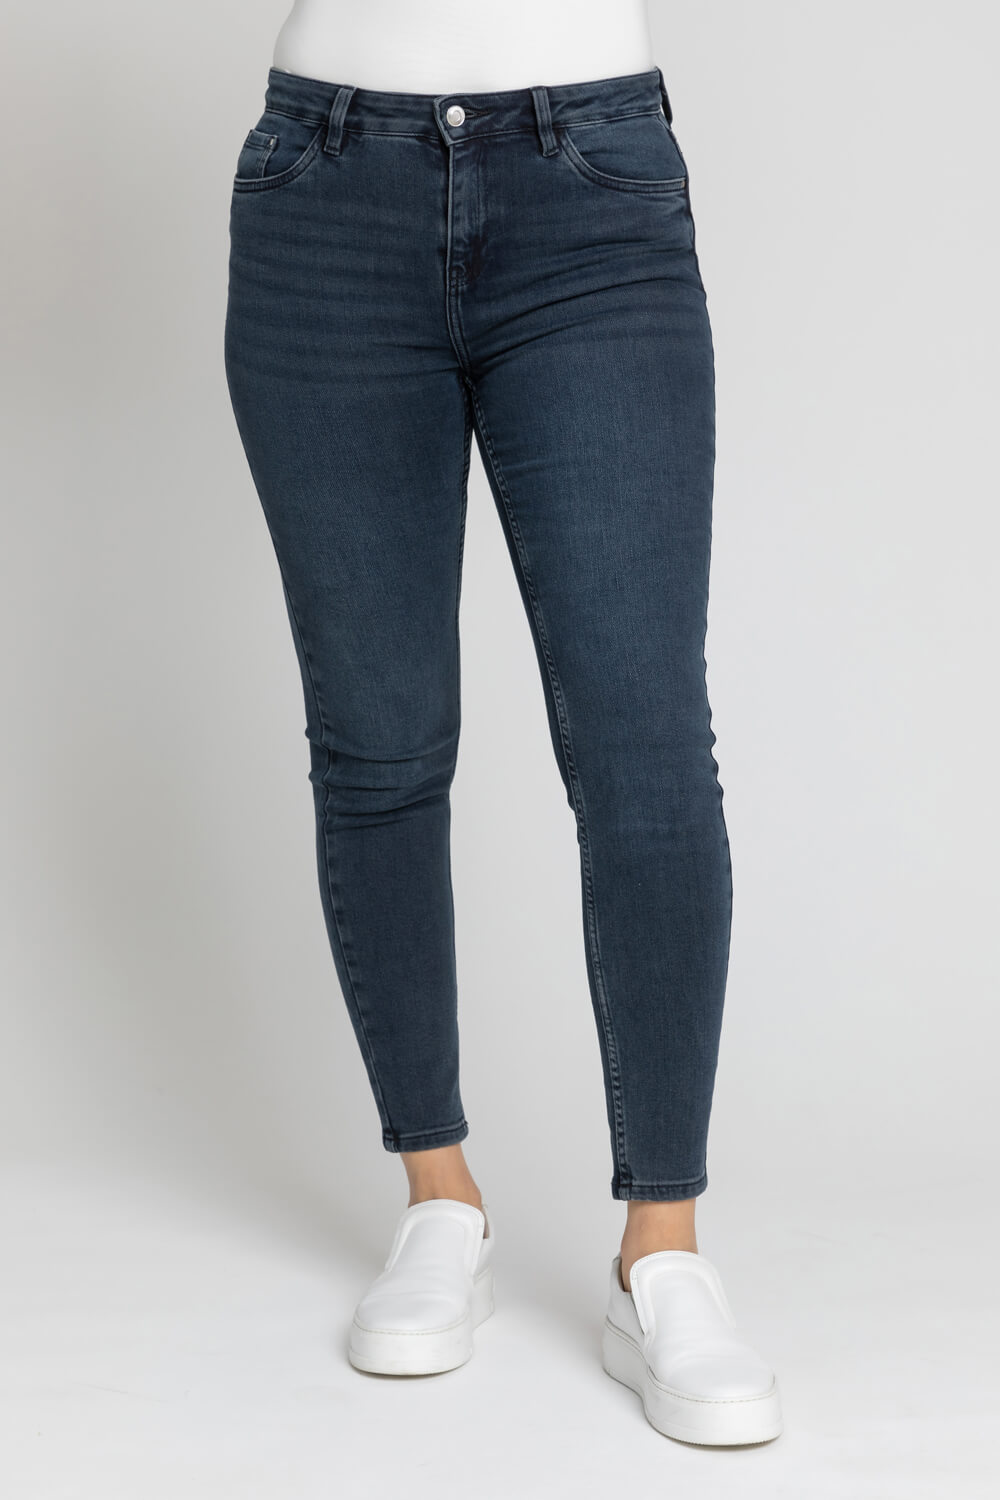 Midnight Blue 29" Stretch Skinny Jeans, Image 2 of 4